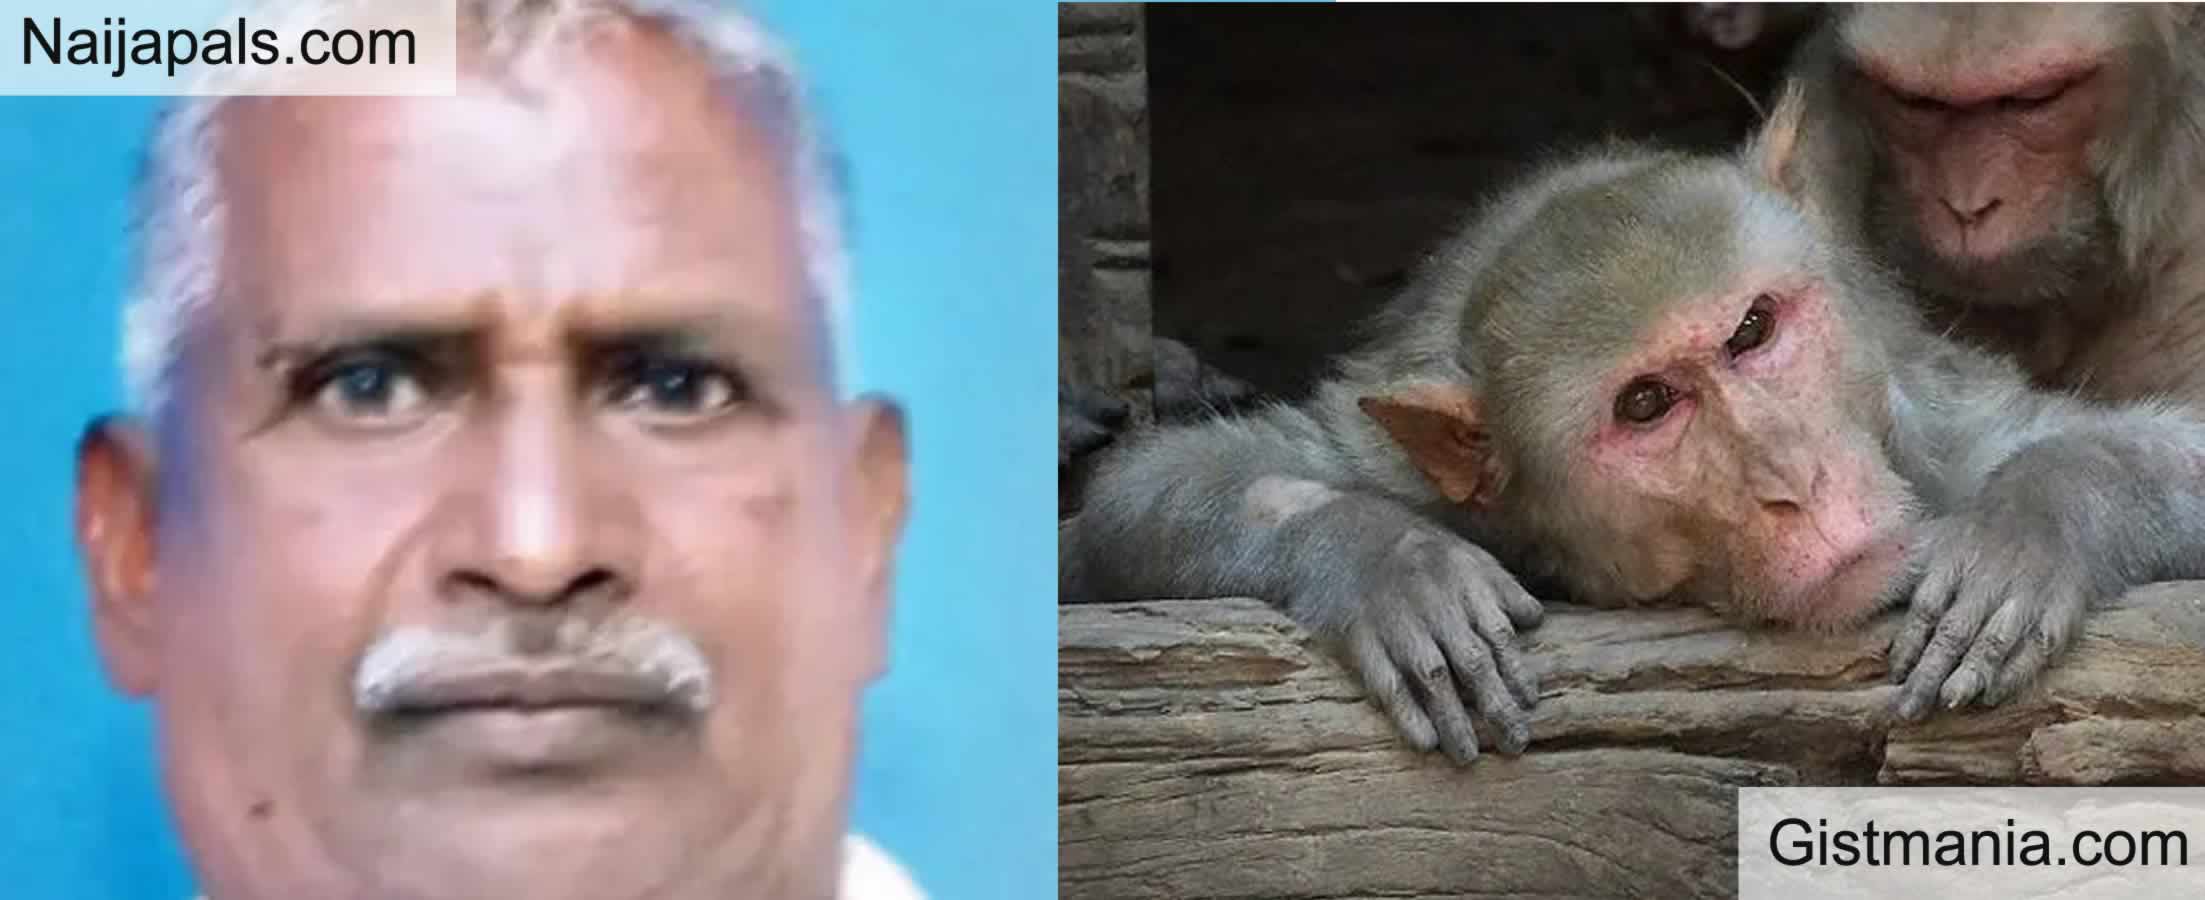 How Monkey Mauls Man To Death While Using The Toilet